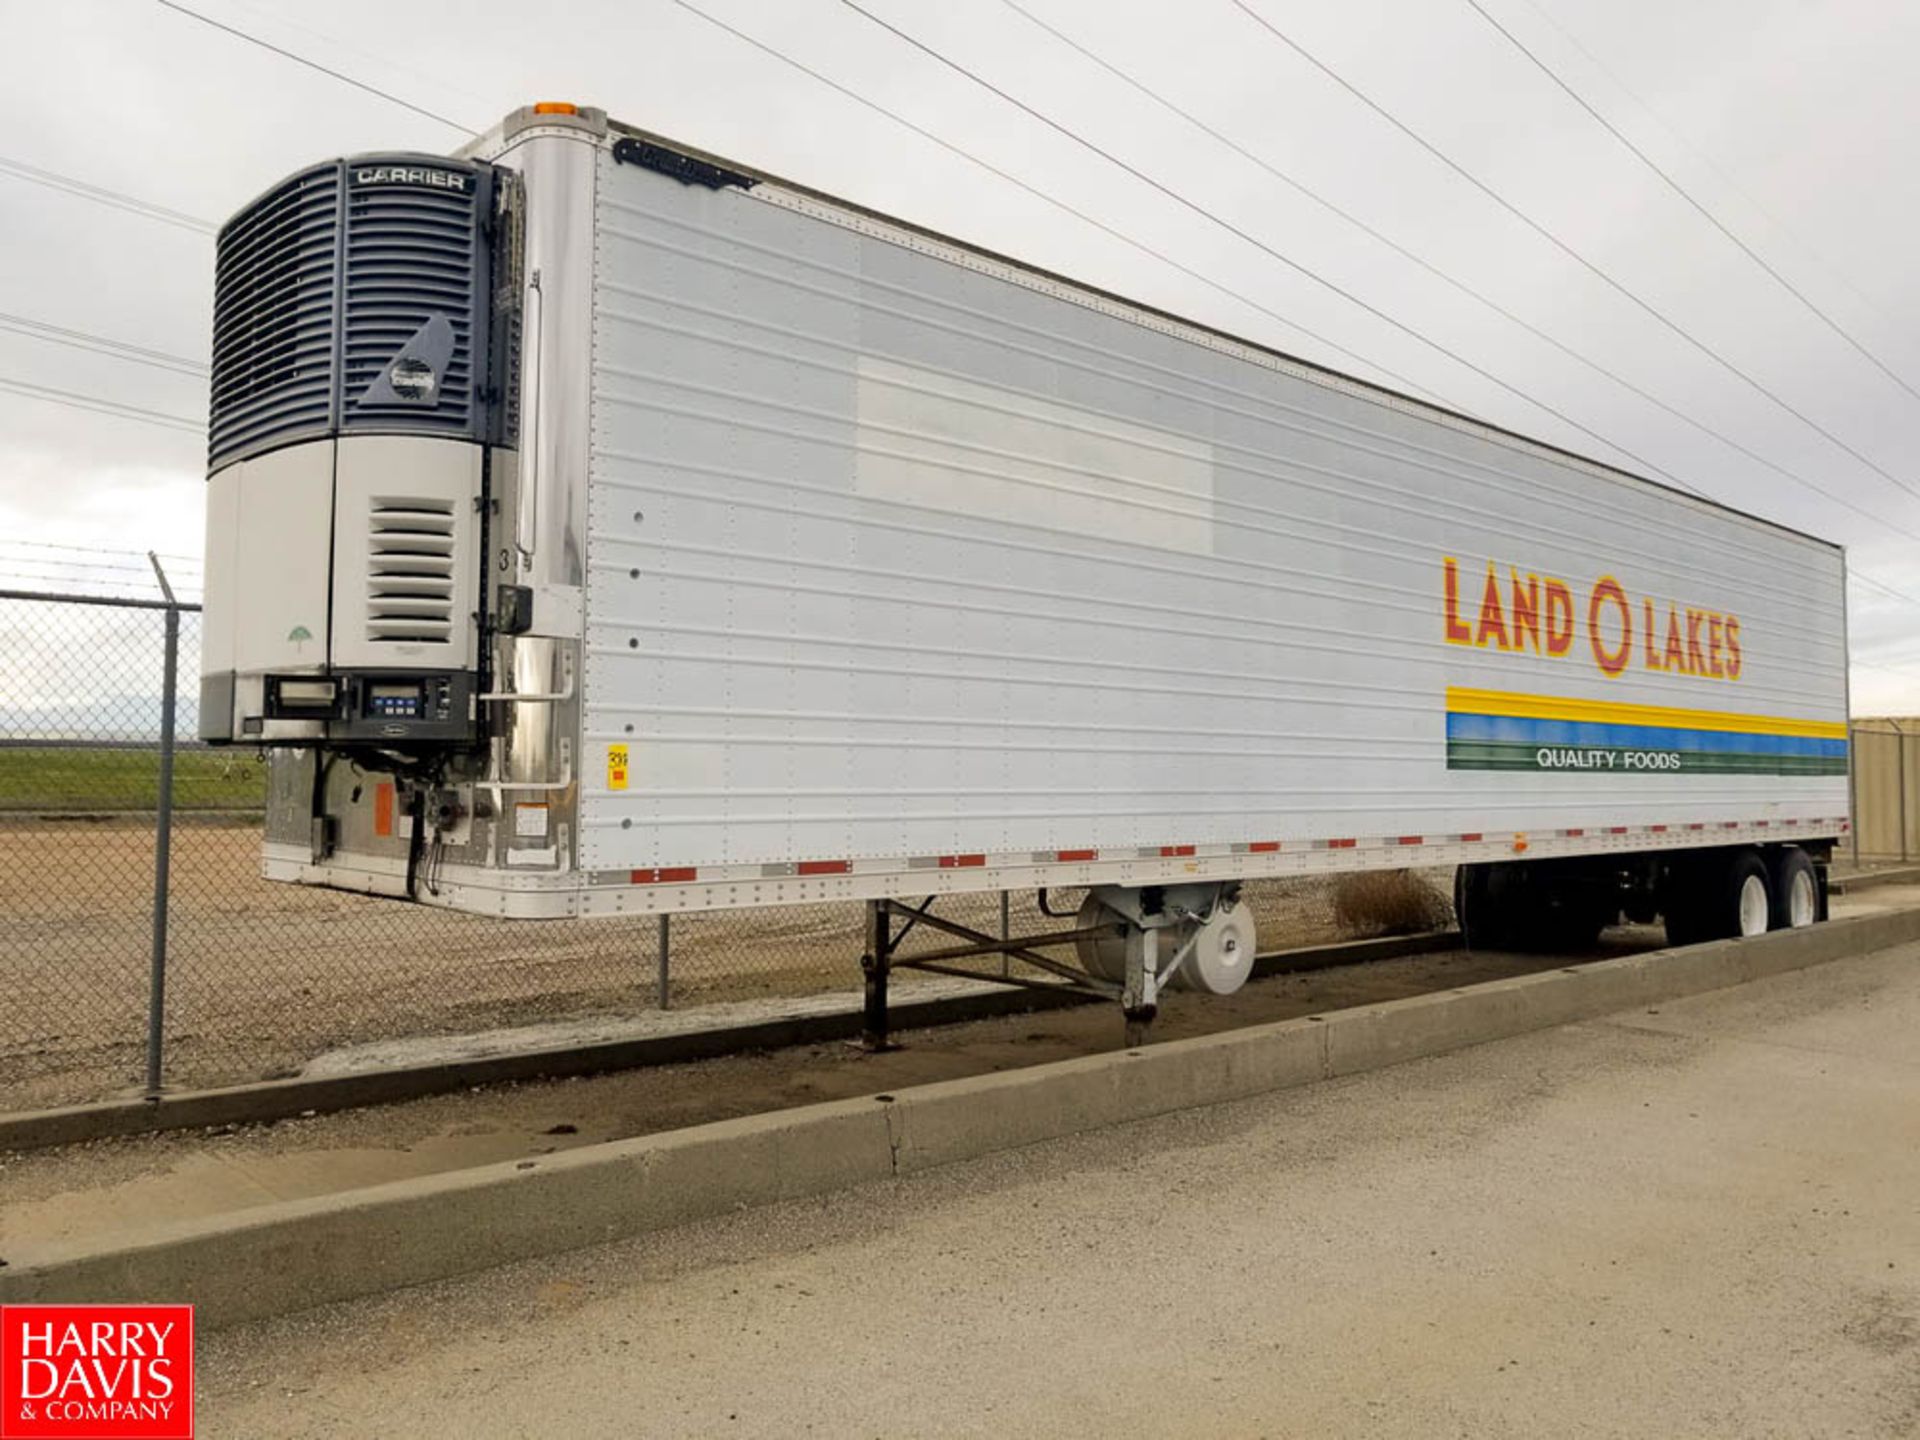 1996 Great Dane 48' Refrigerated Semi Trailer Model 7811TZ-148 65000 LB. GVWR Dual Axle with Carrier